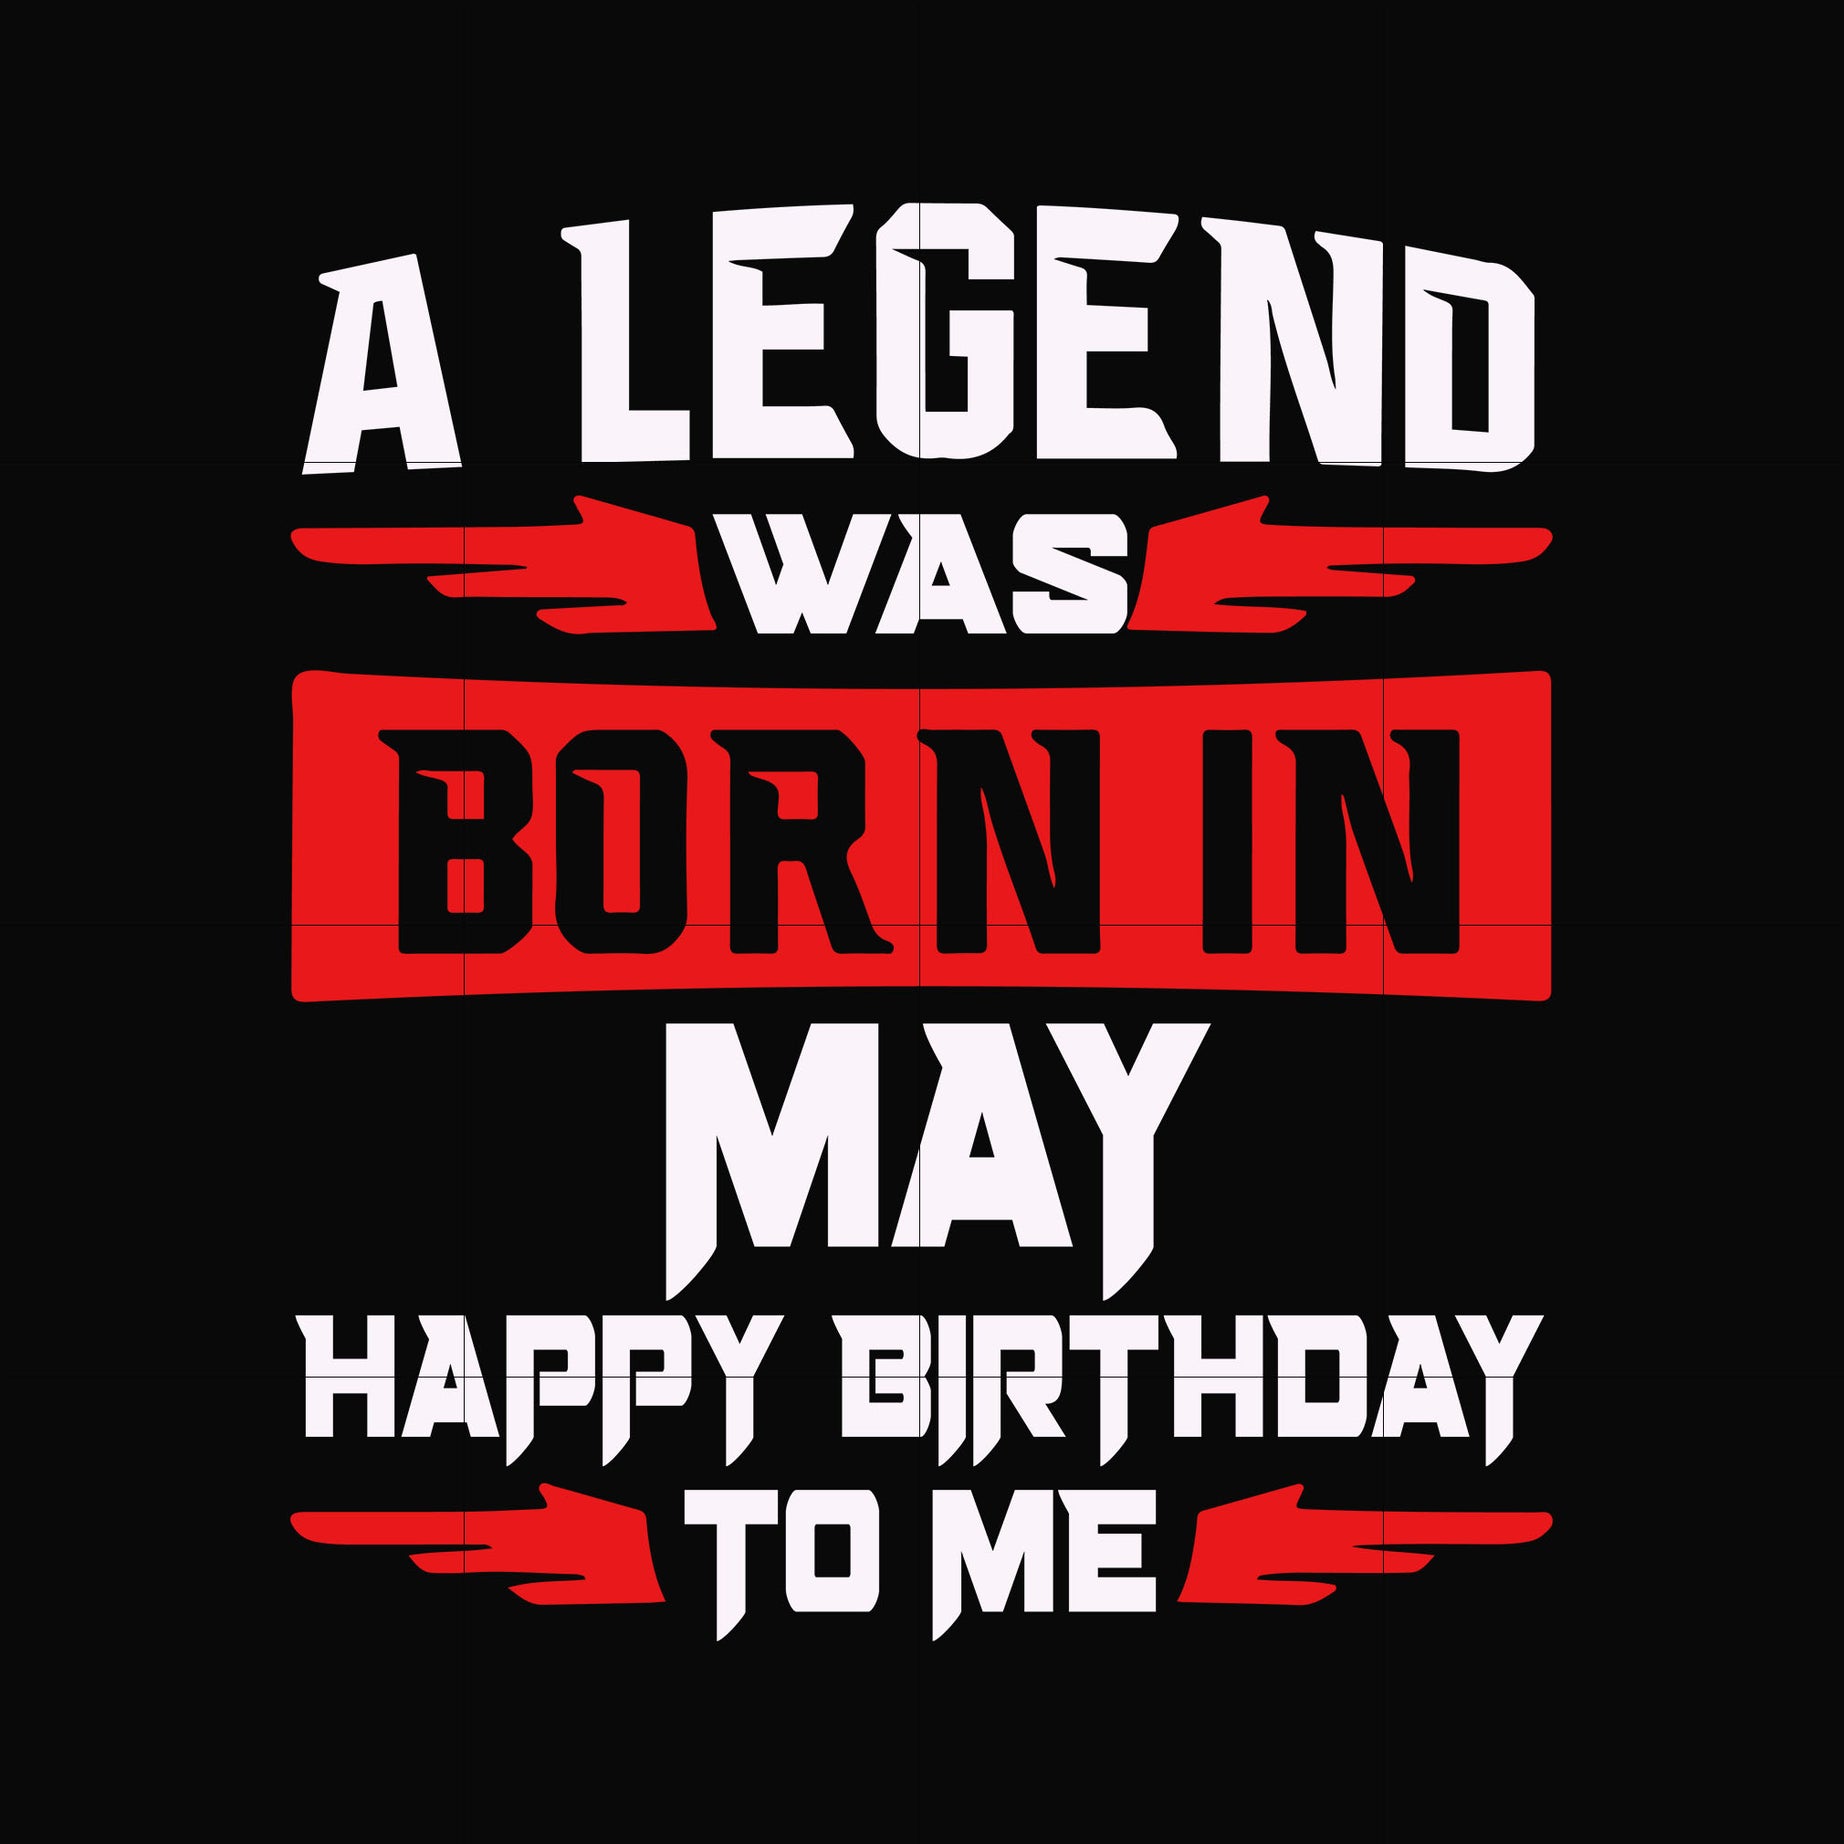 A legend was born in May happy birthday to me svg, png, dxf, eps digital file BD0114